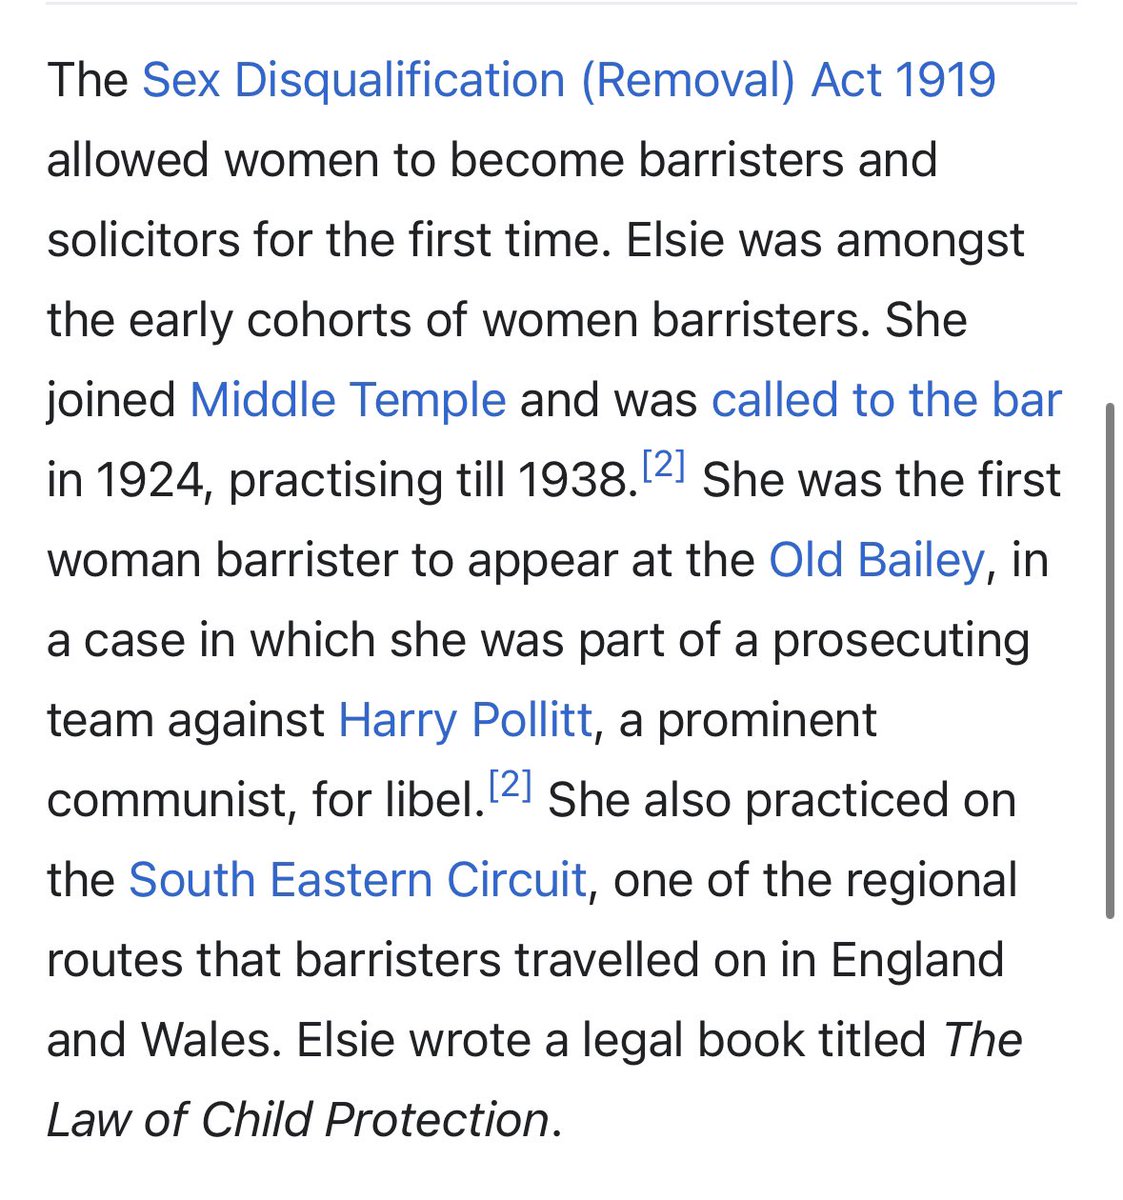 “My Lord, I have endured worse.” Miss Elsie Bowerman of counsel packed quite a bit into her 84 years on this planet. I bet the Judges at the Bailey found her quite fearsome.